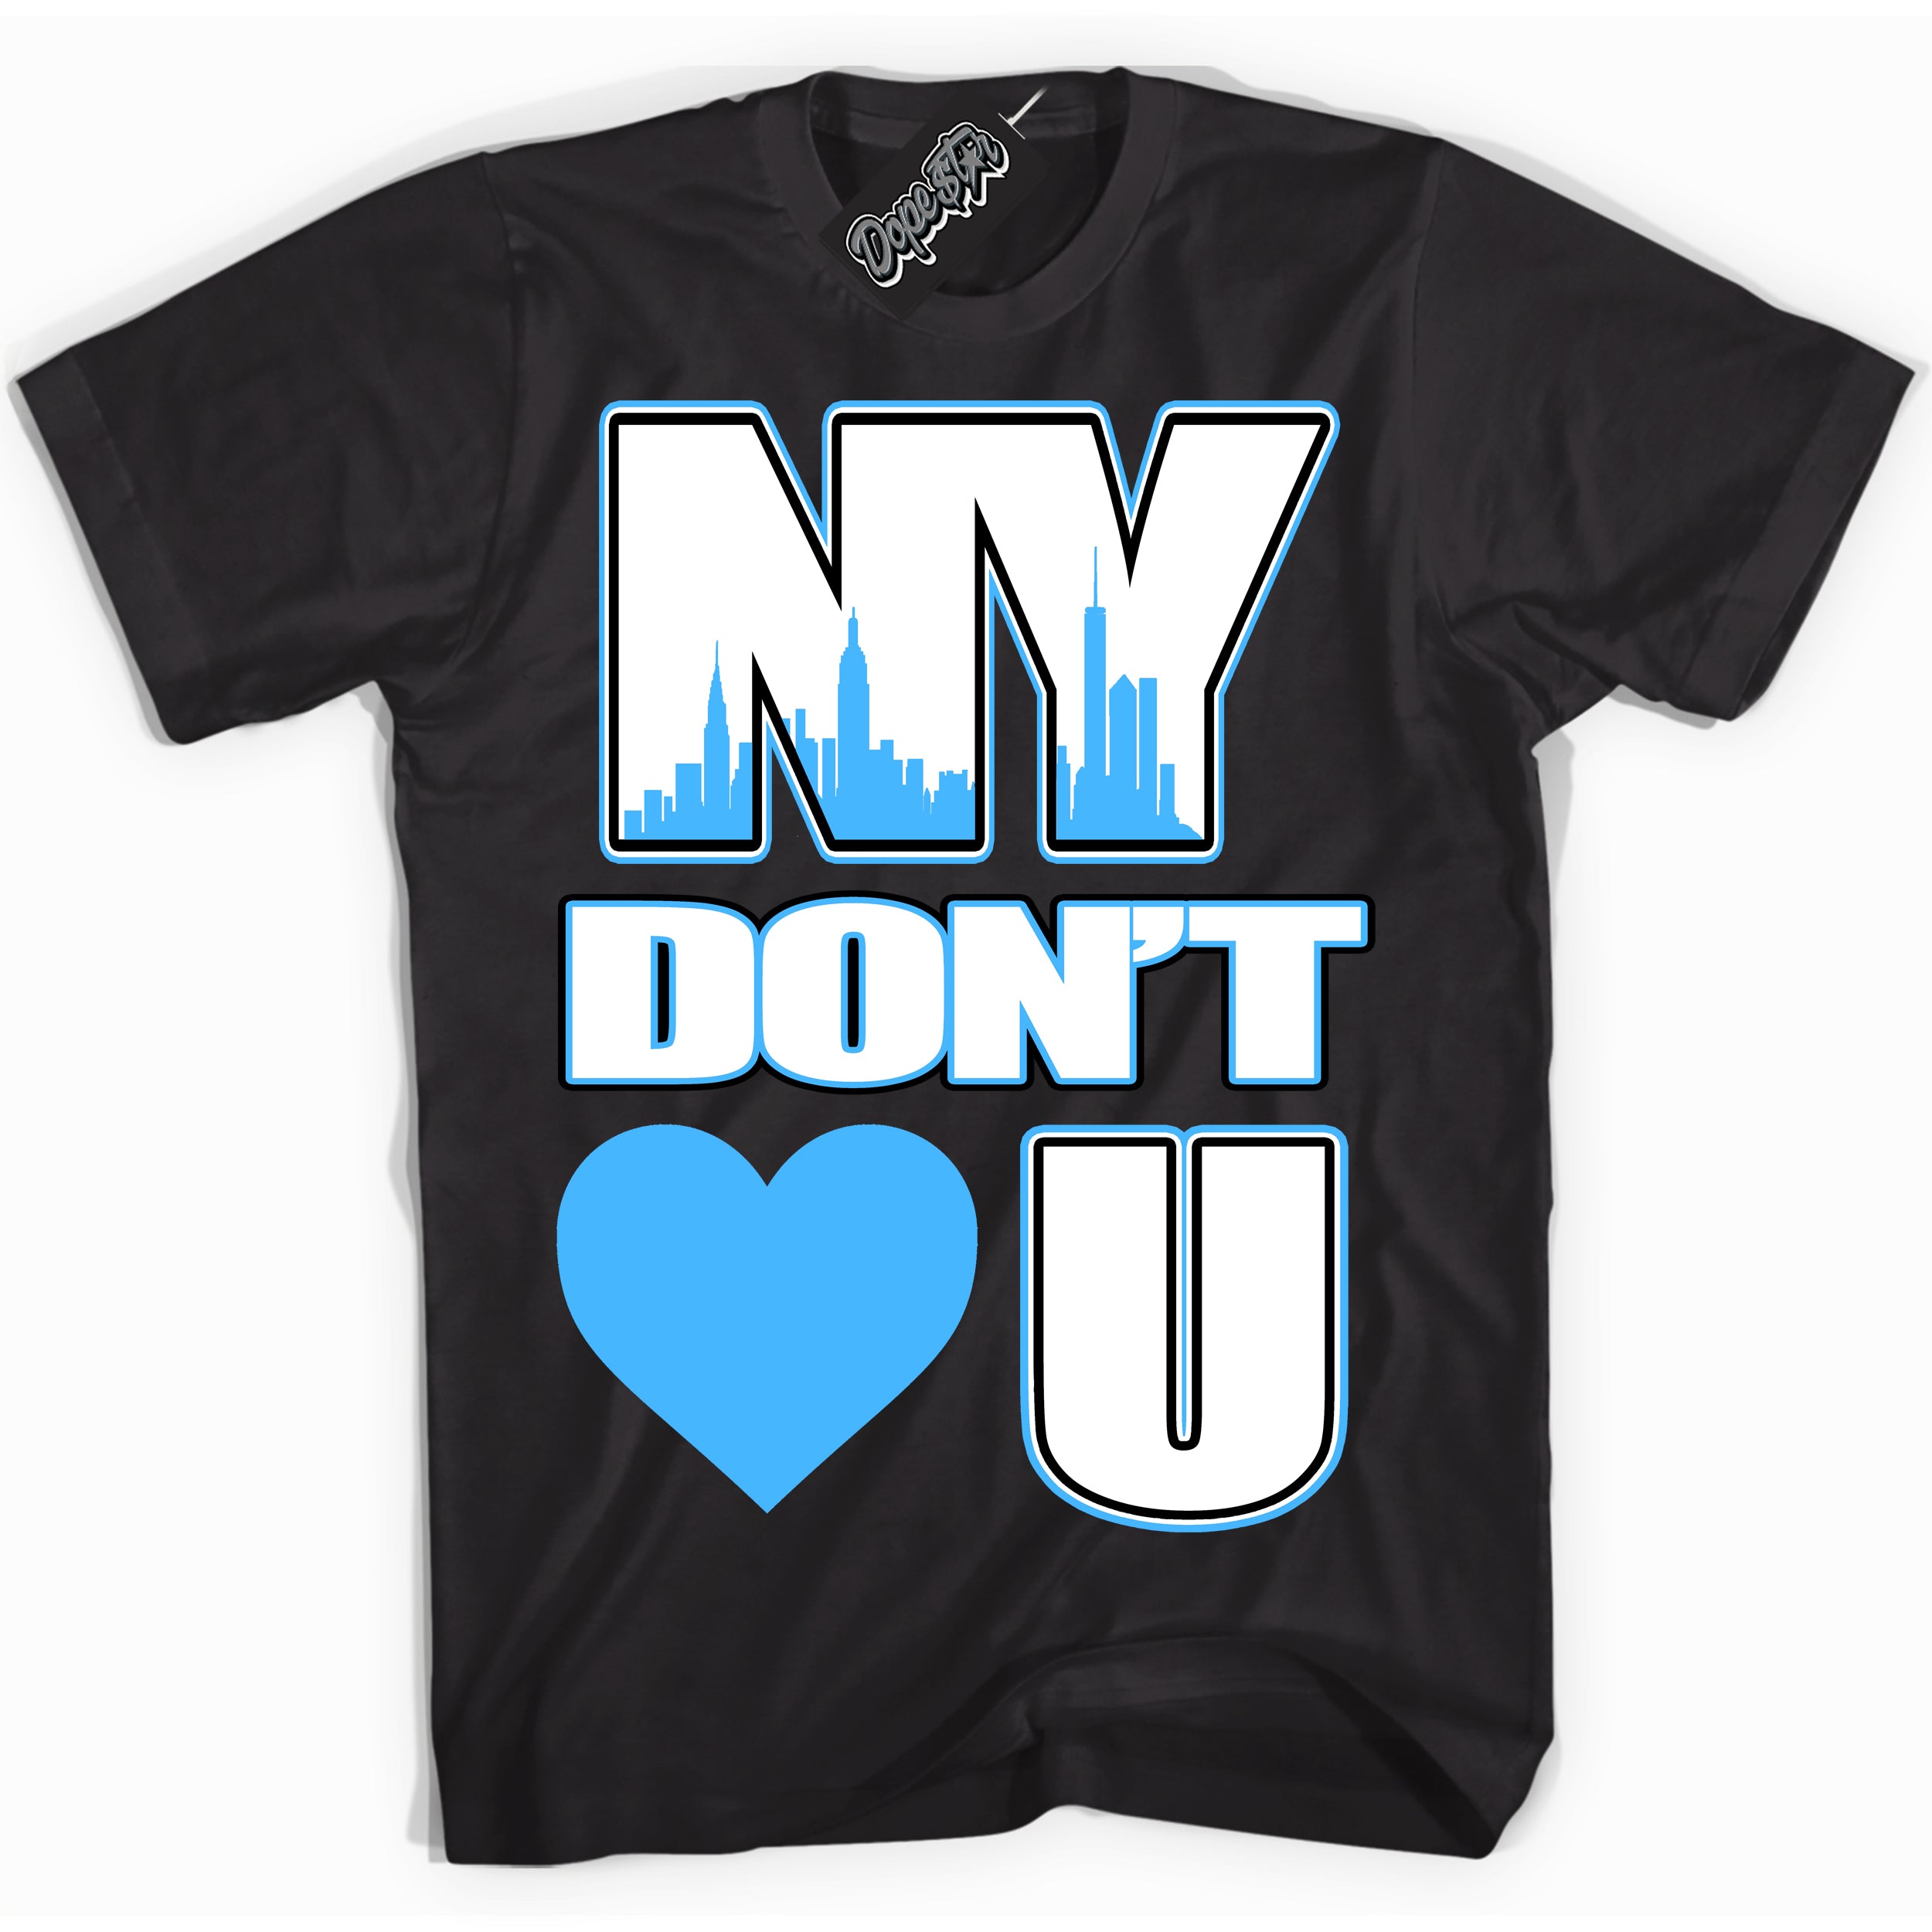 Cool Black graphic tee with “ NY Don't Love You ” design, that perfectly matches Powder Blue 9s sneakers 